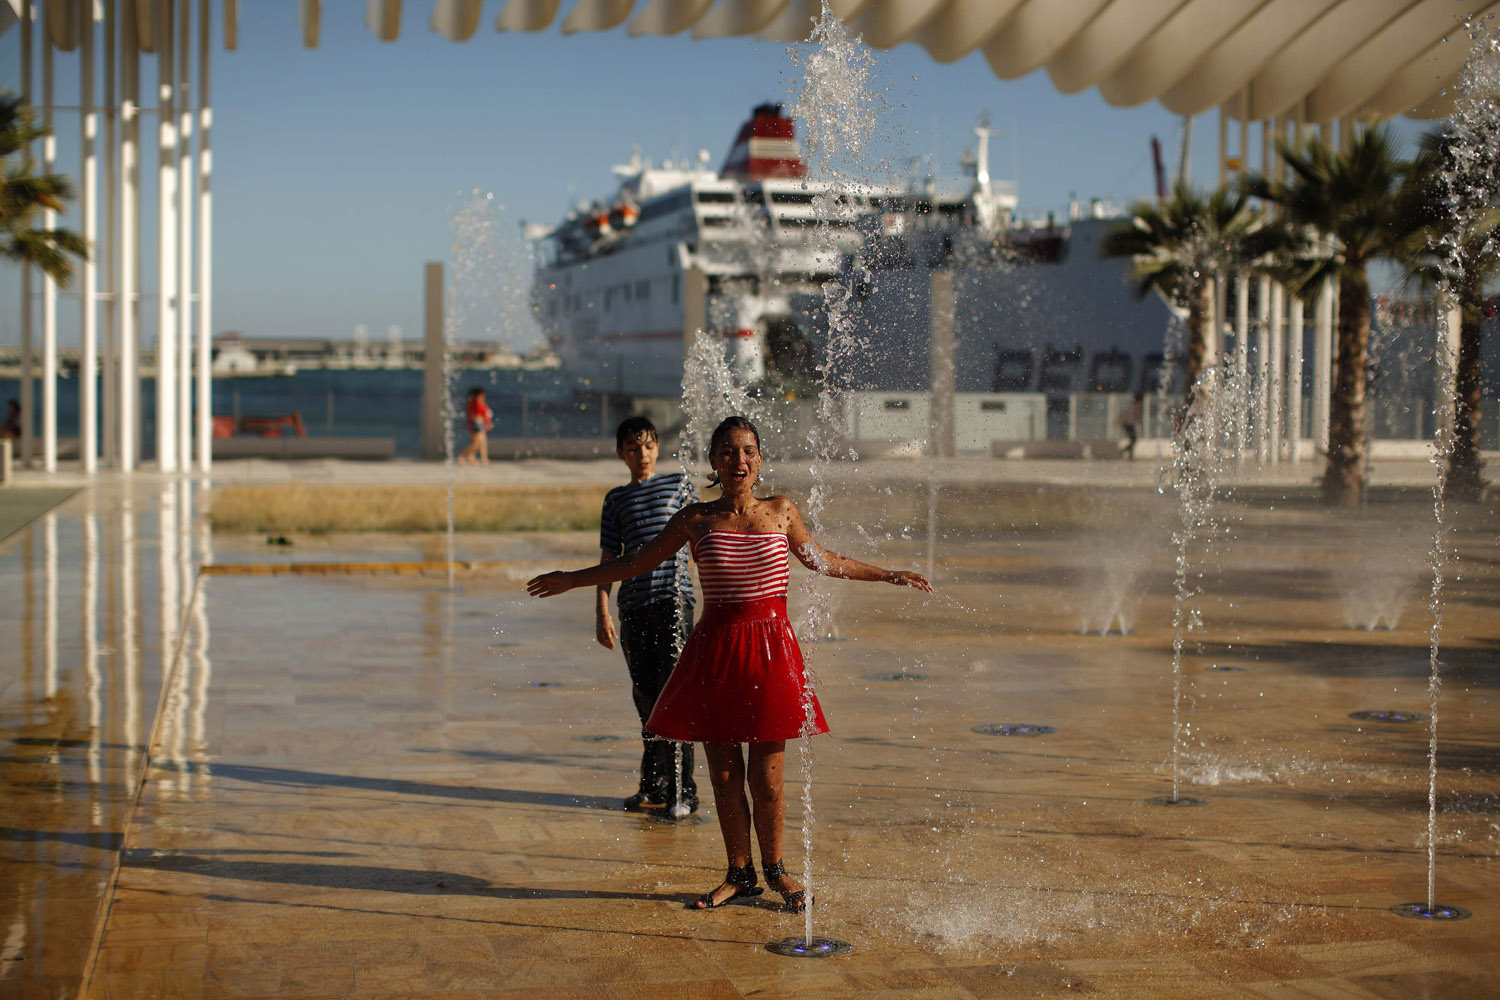 A girl and a boy cool off in a fountain during a hot day at the port in Malaga